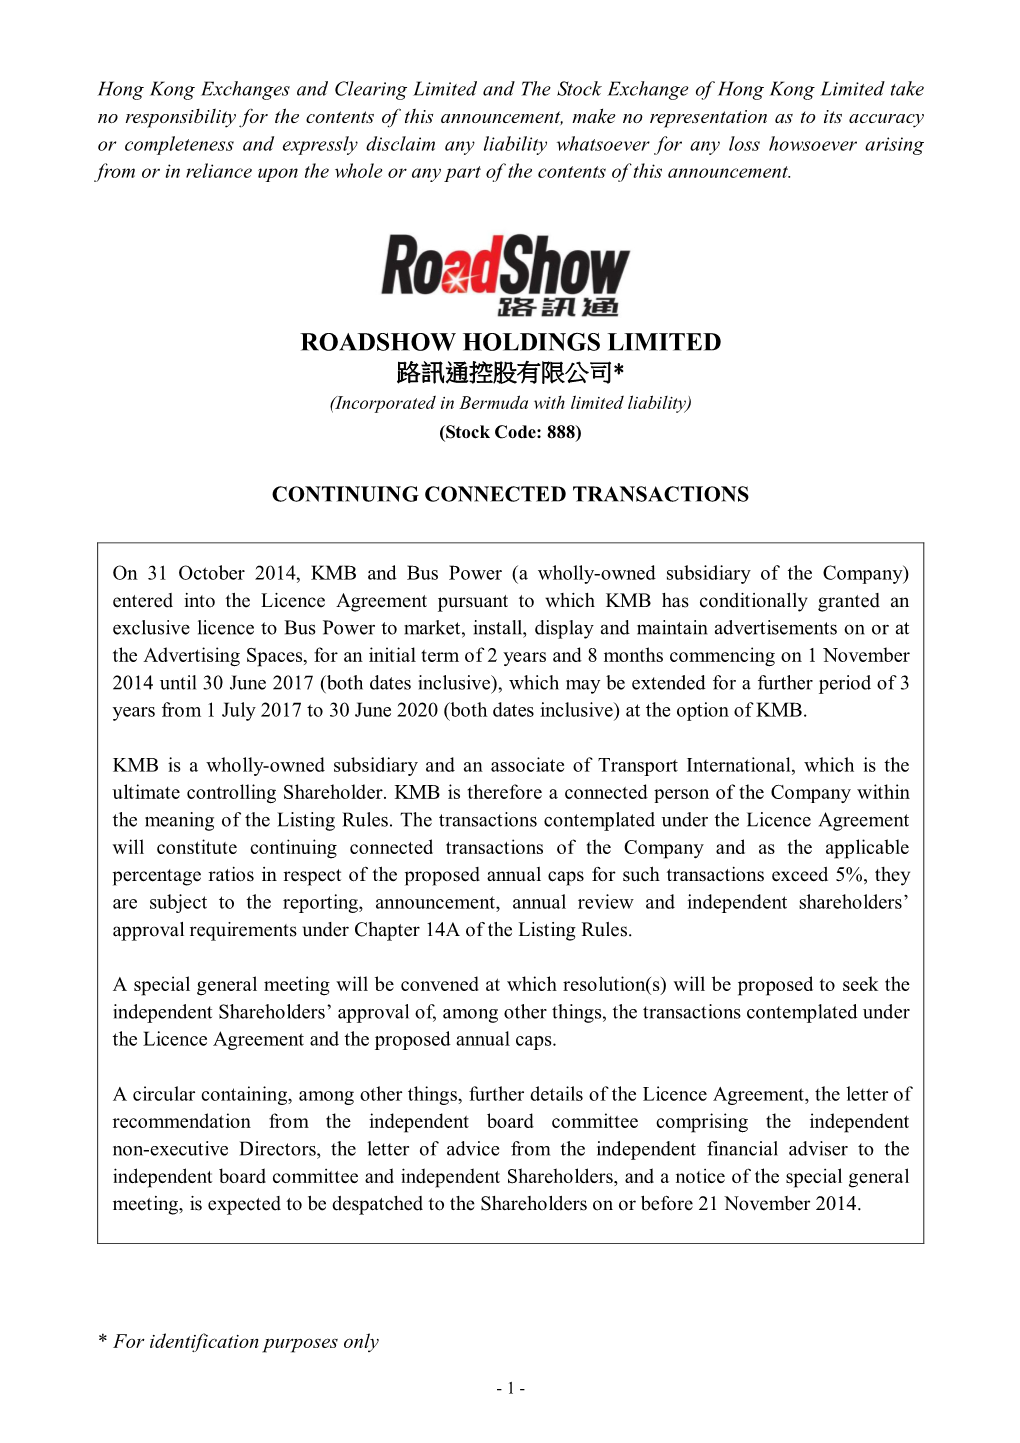 ROADSHOW HOLDINGS LIMITED 路訊通控股有限公司* (Incorporated in Bermuda with Limited Liability) (Stock Code: 888)